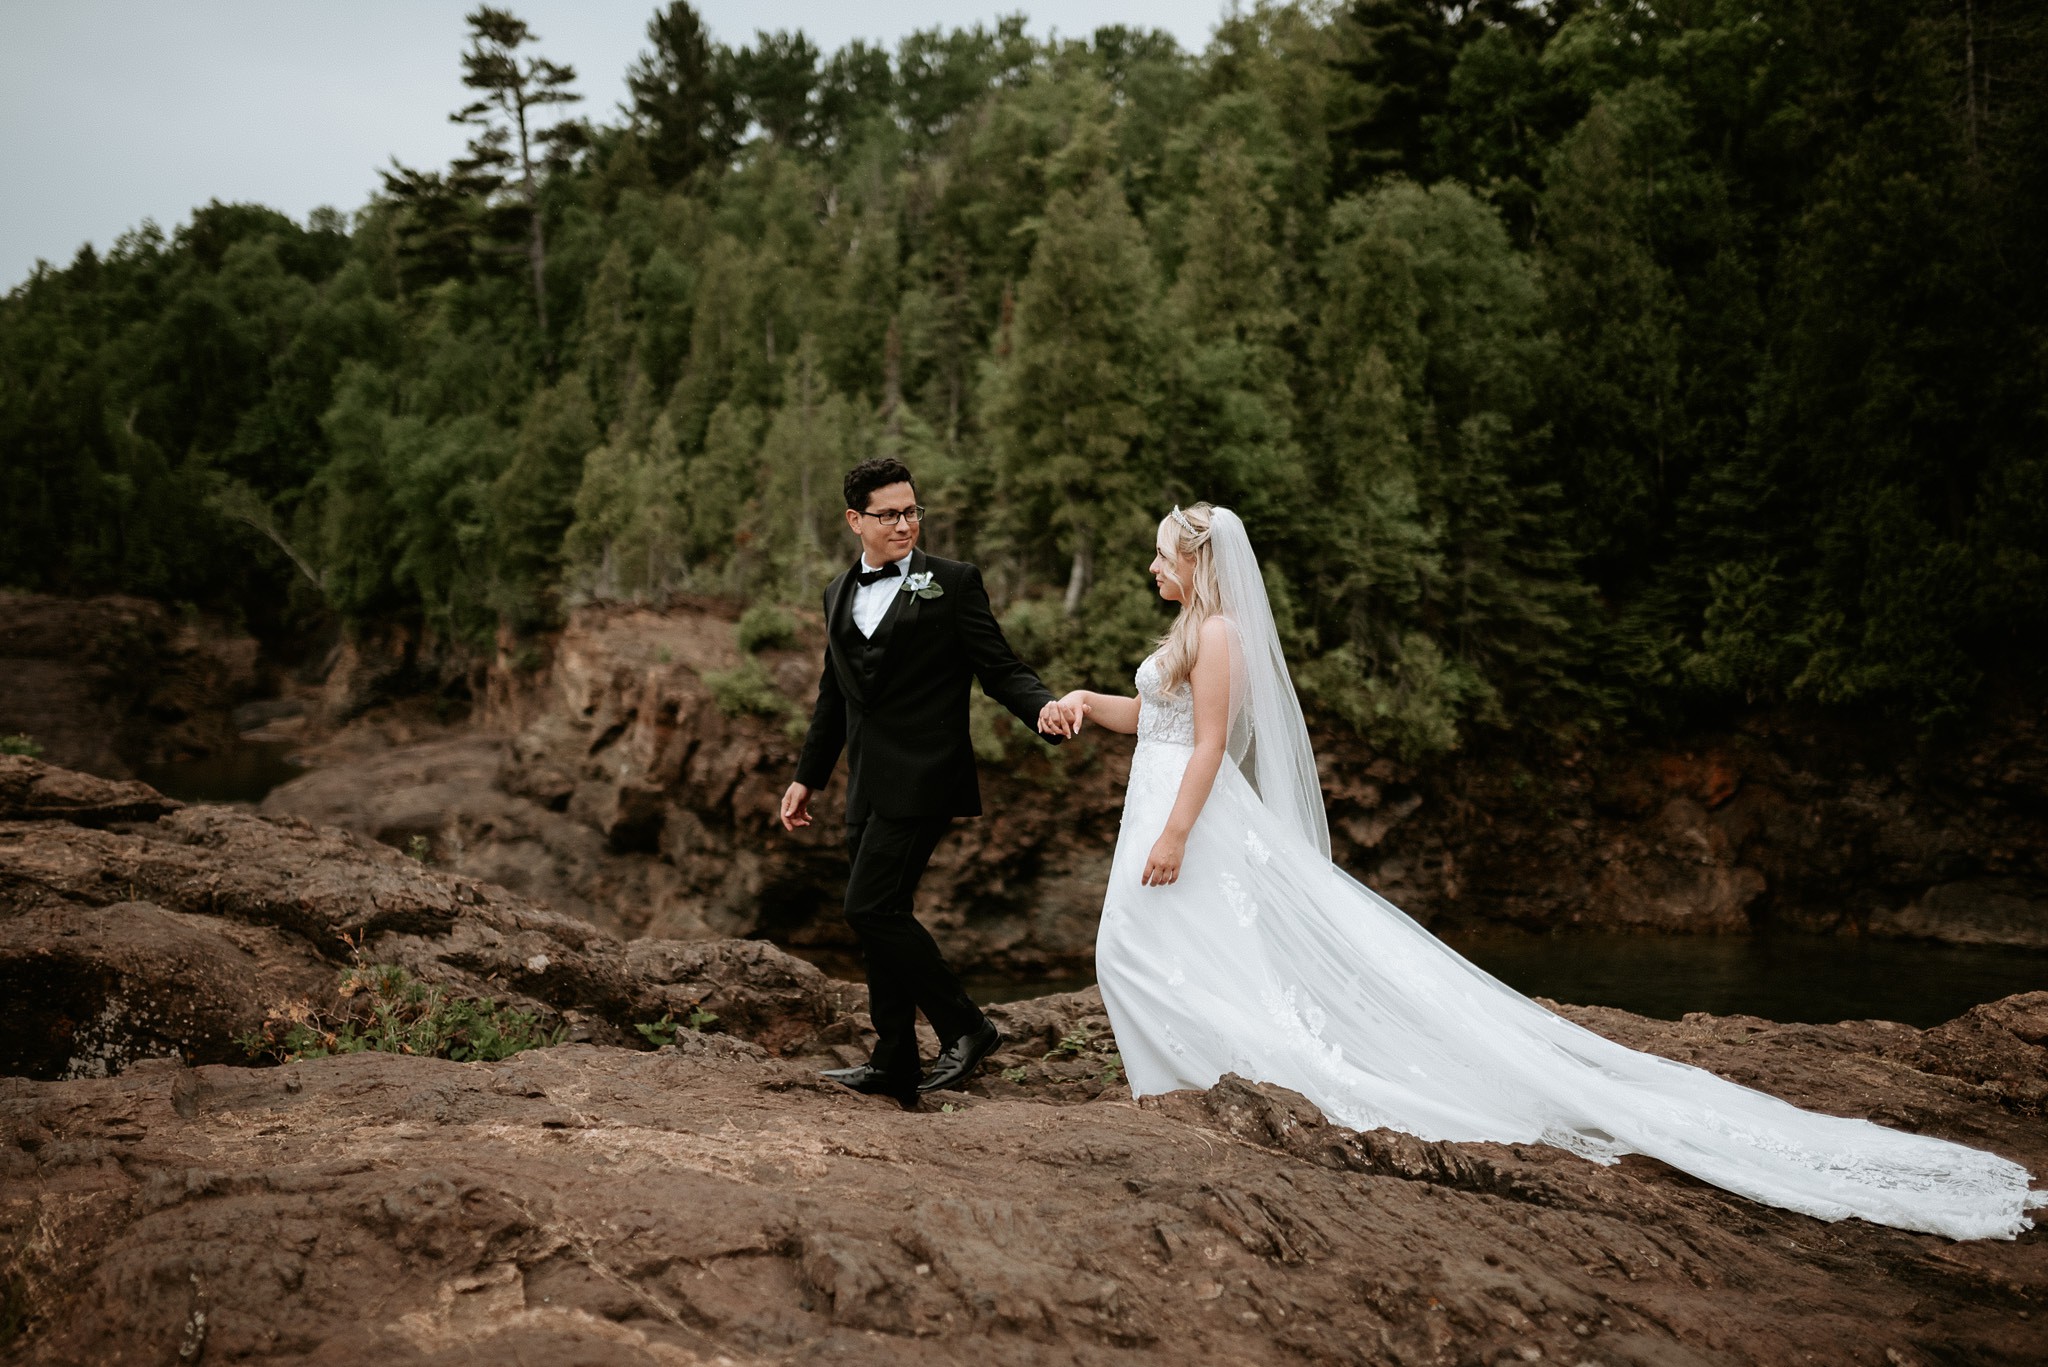 Bride and groom walking holding hands at their elopement in Marquette, Michigan.